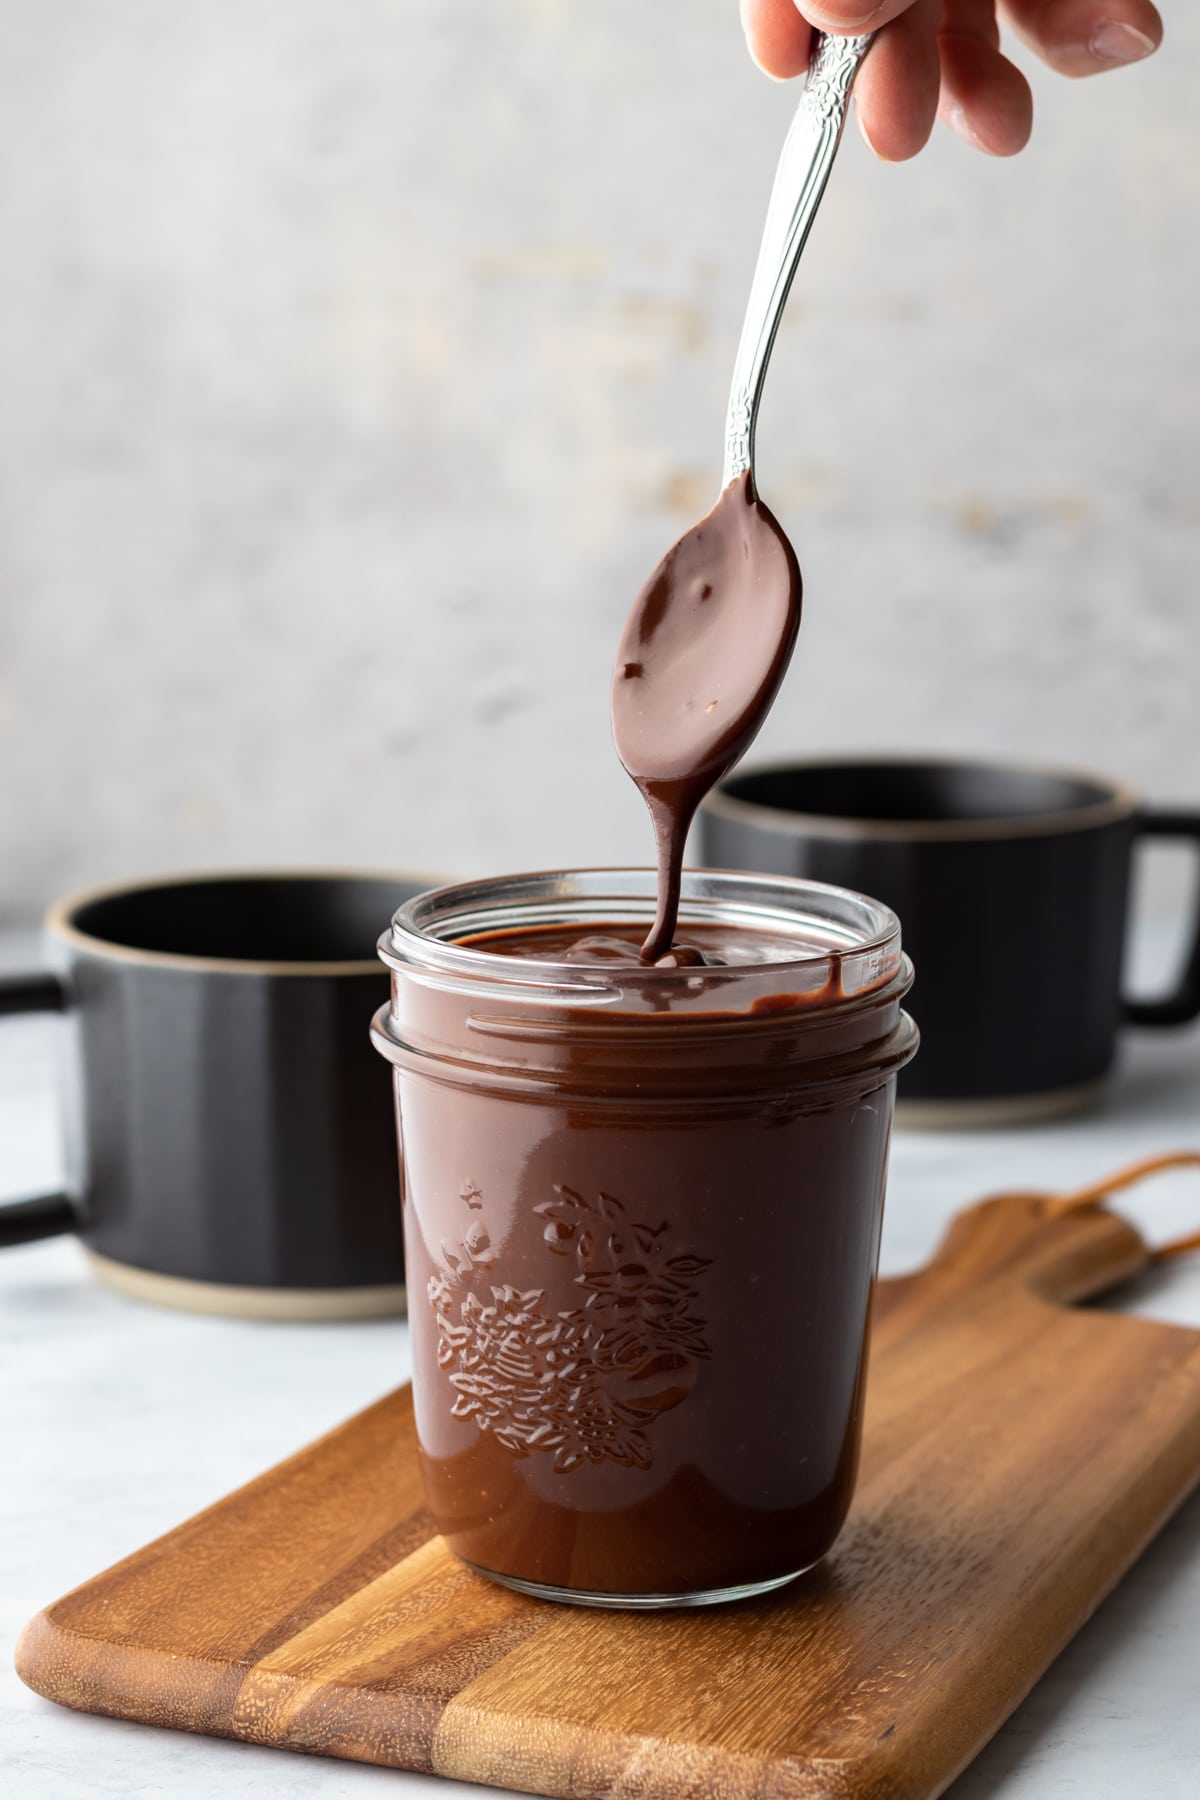 drizzling chocolate sauce from a spoon over a jar full.